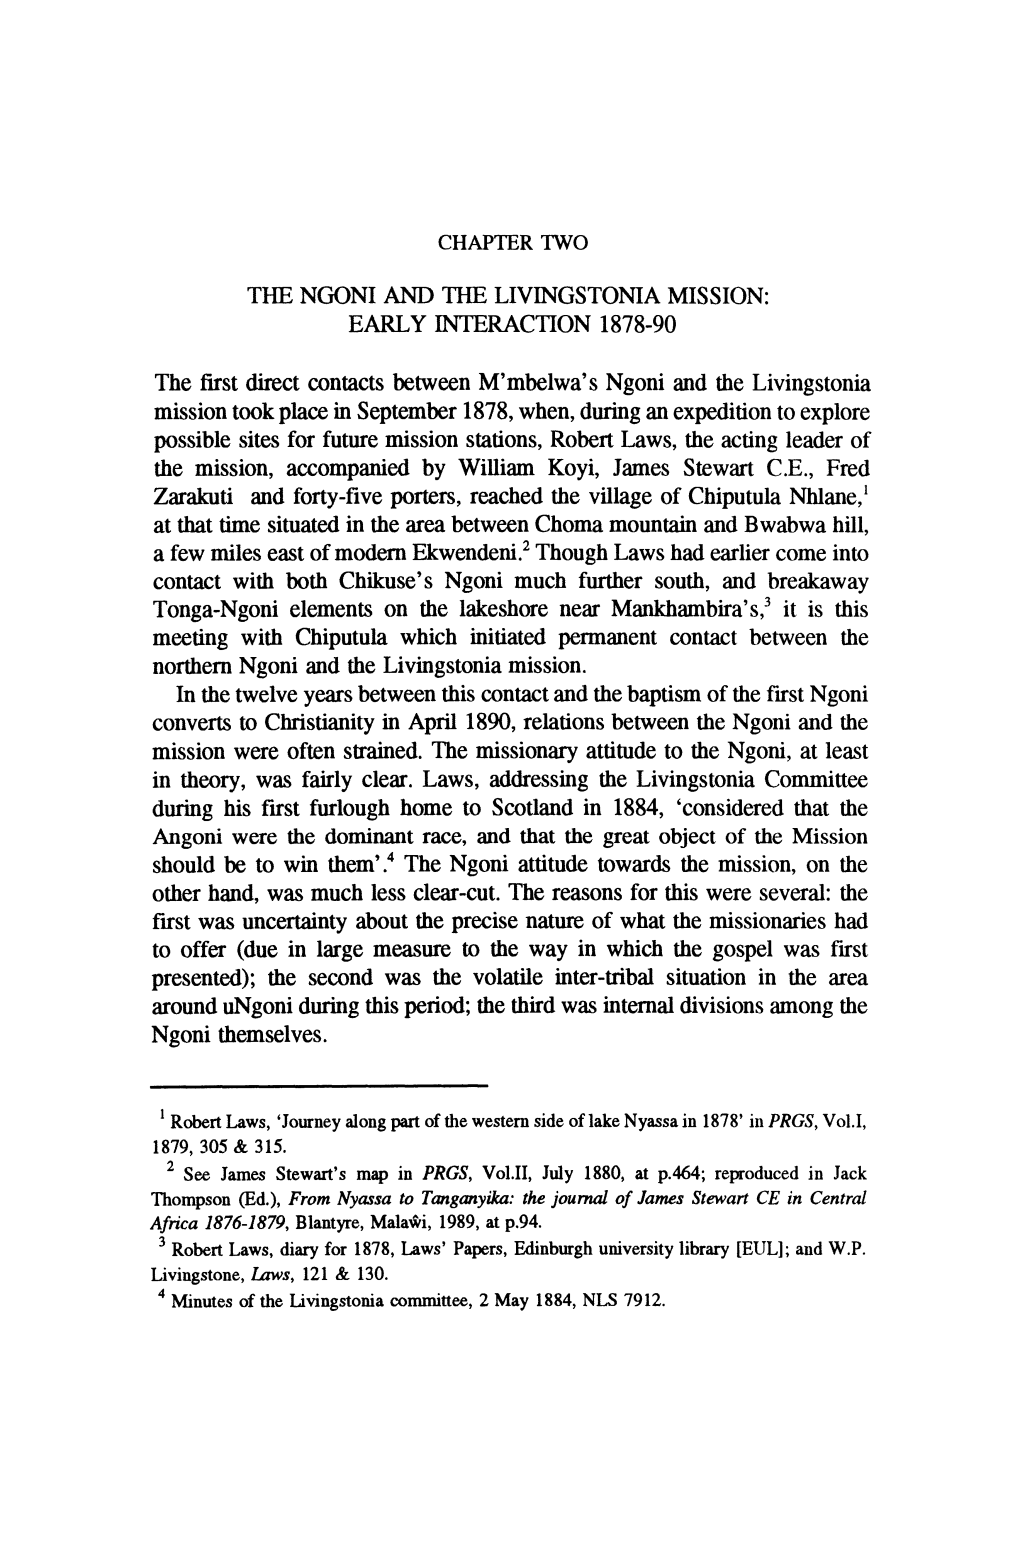 The Ngoni and the Livingstonia Mission: Early Interaction 1878-90